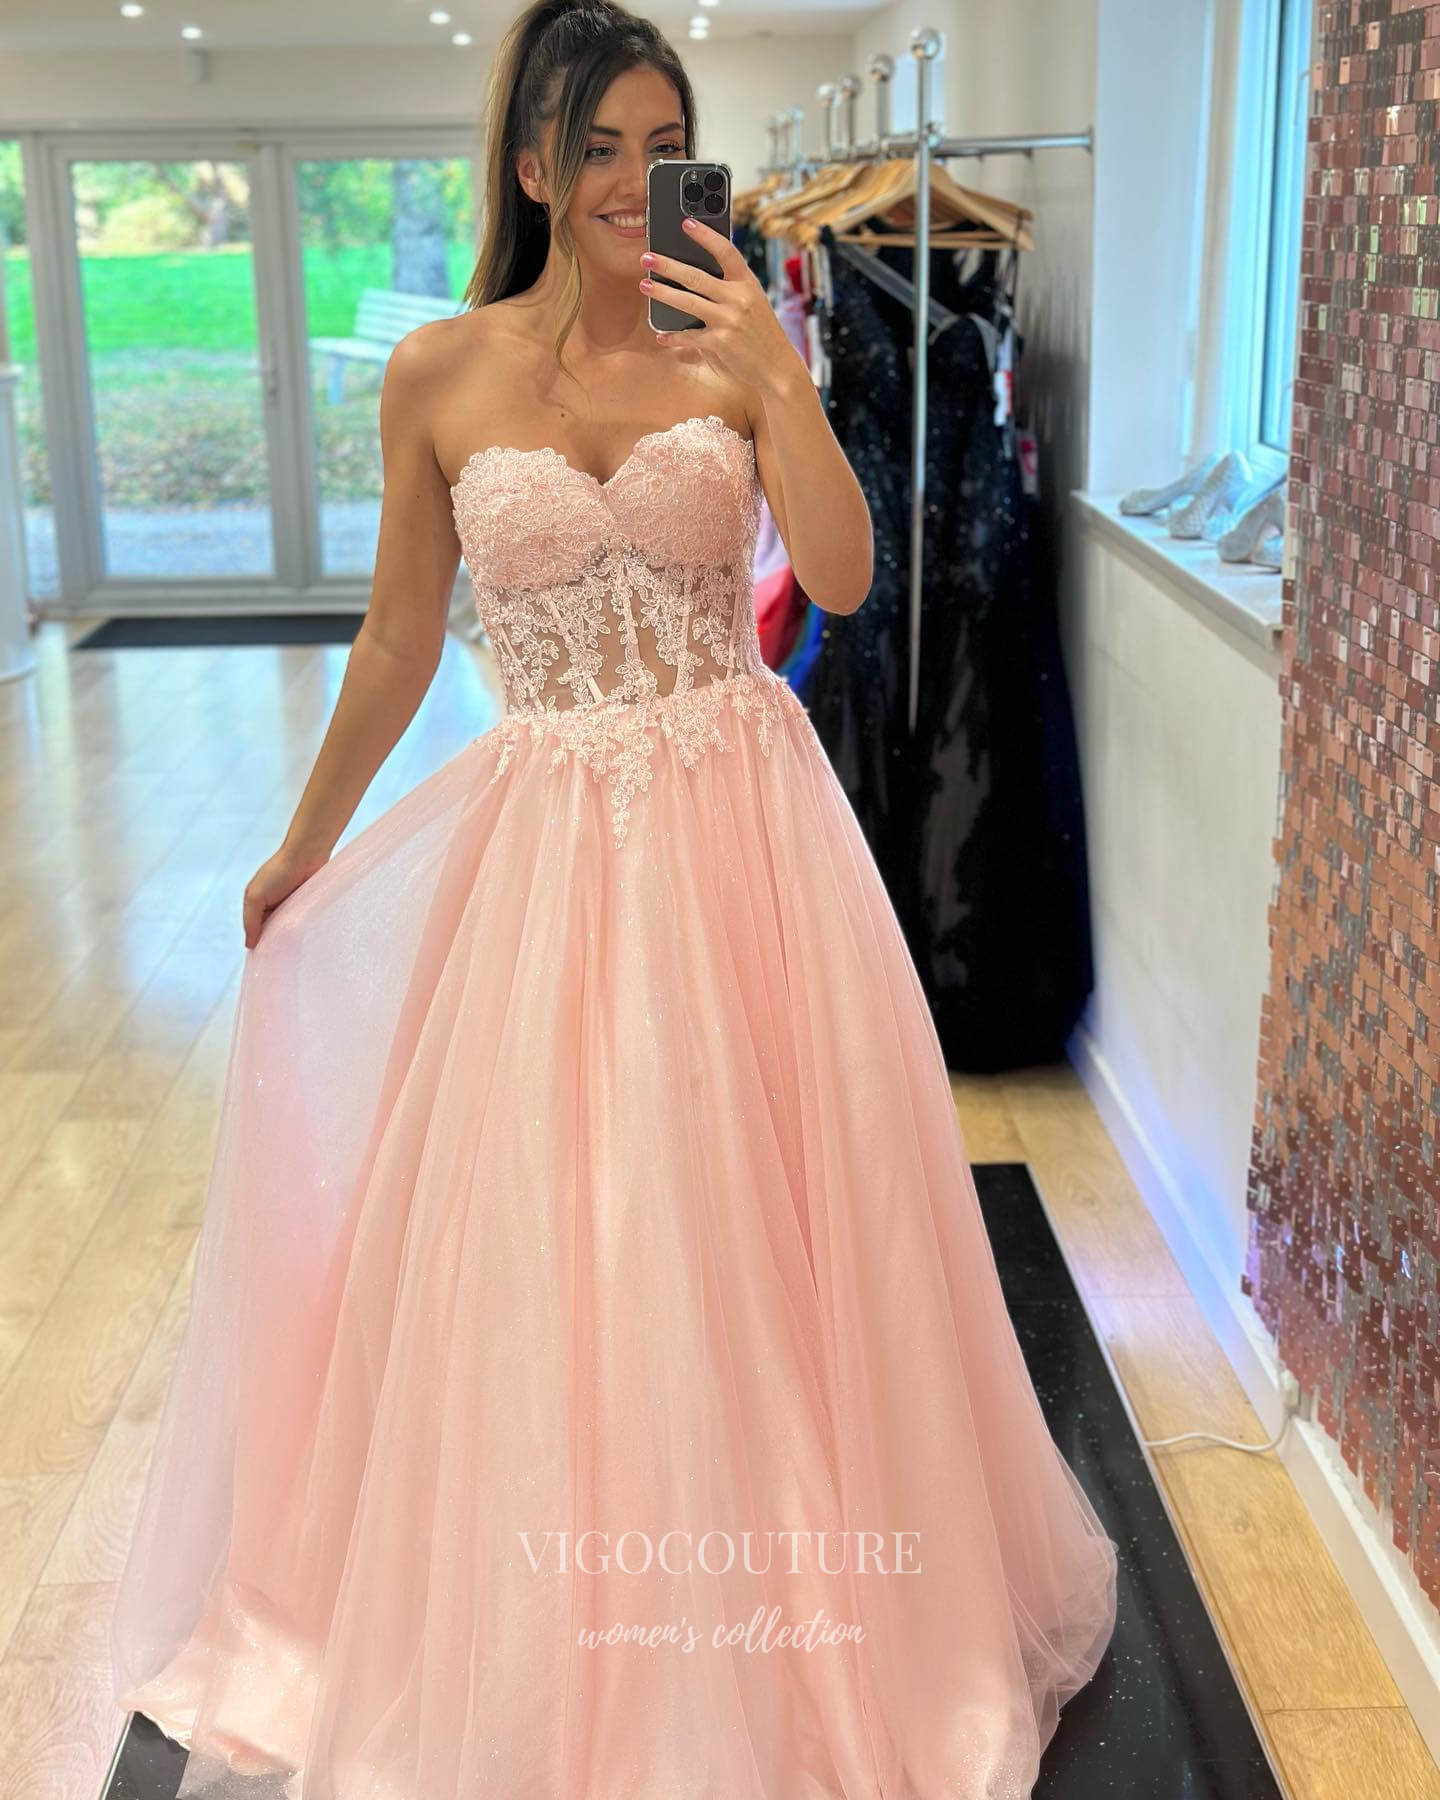 Green Lace Applique Prom Dresses Sparkly Tulle Strapless Evening Dress 21992-Prom Dresses-vigocouture-Blush-US2-vigocouture